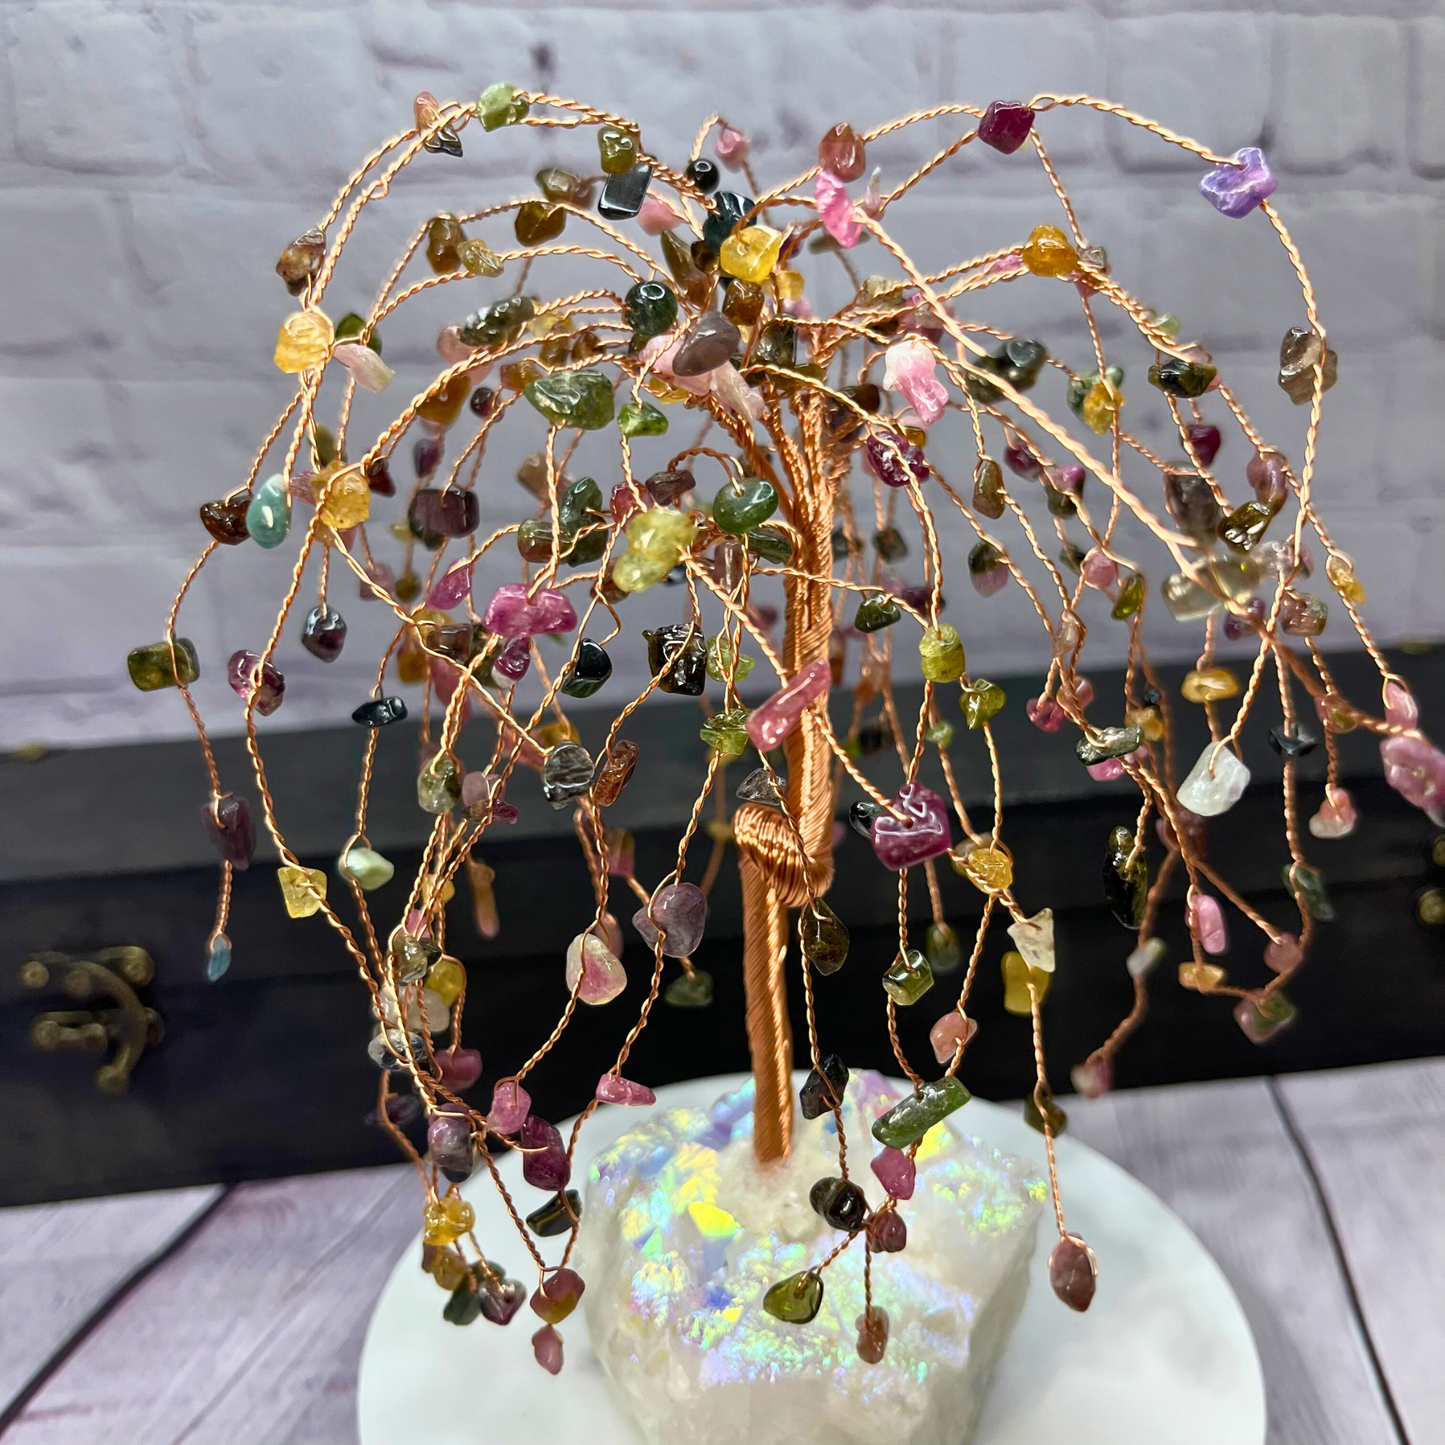 Weeping Willow Tree with Angel Aura Base